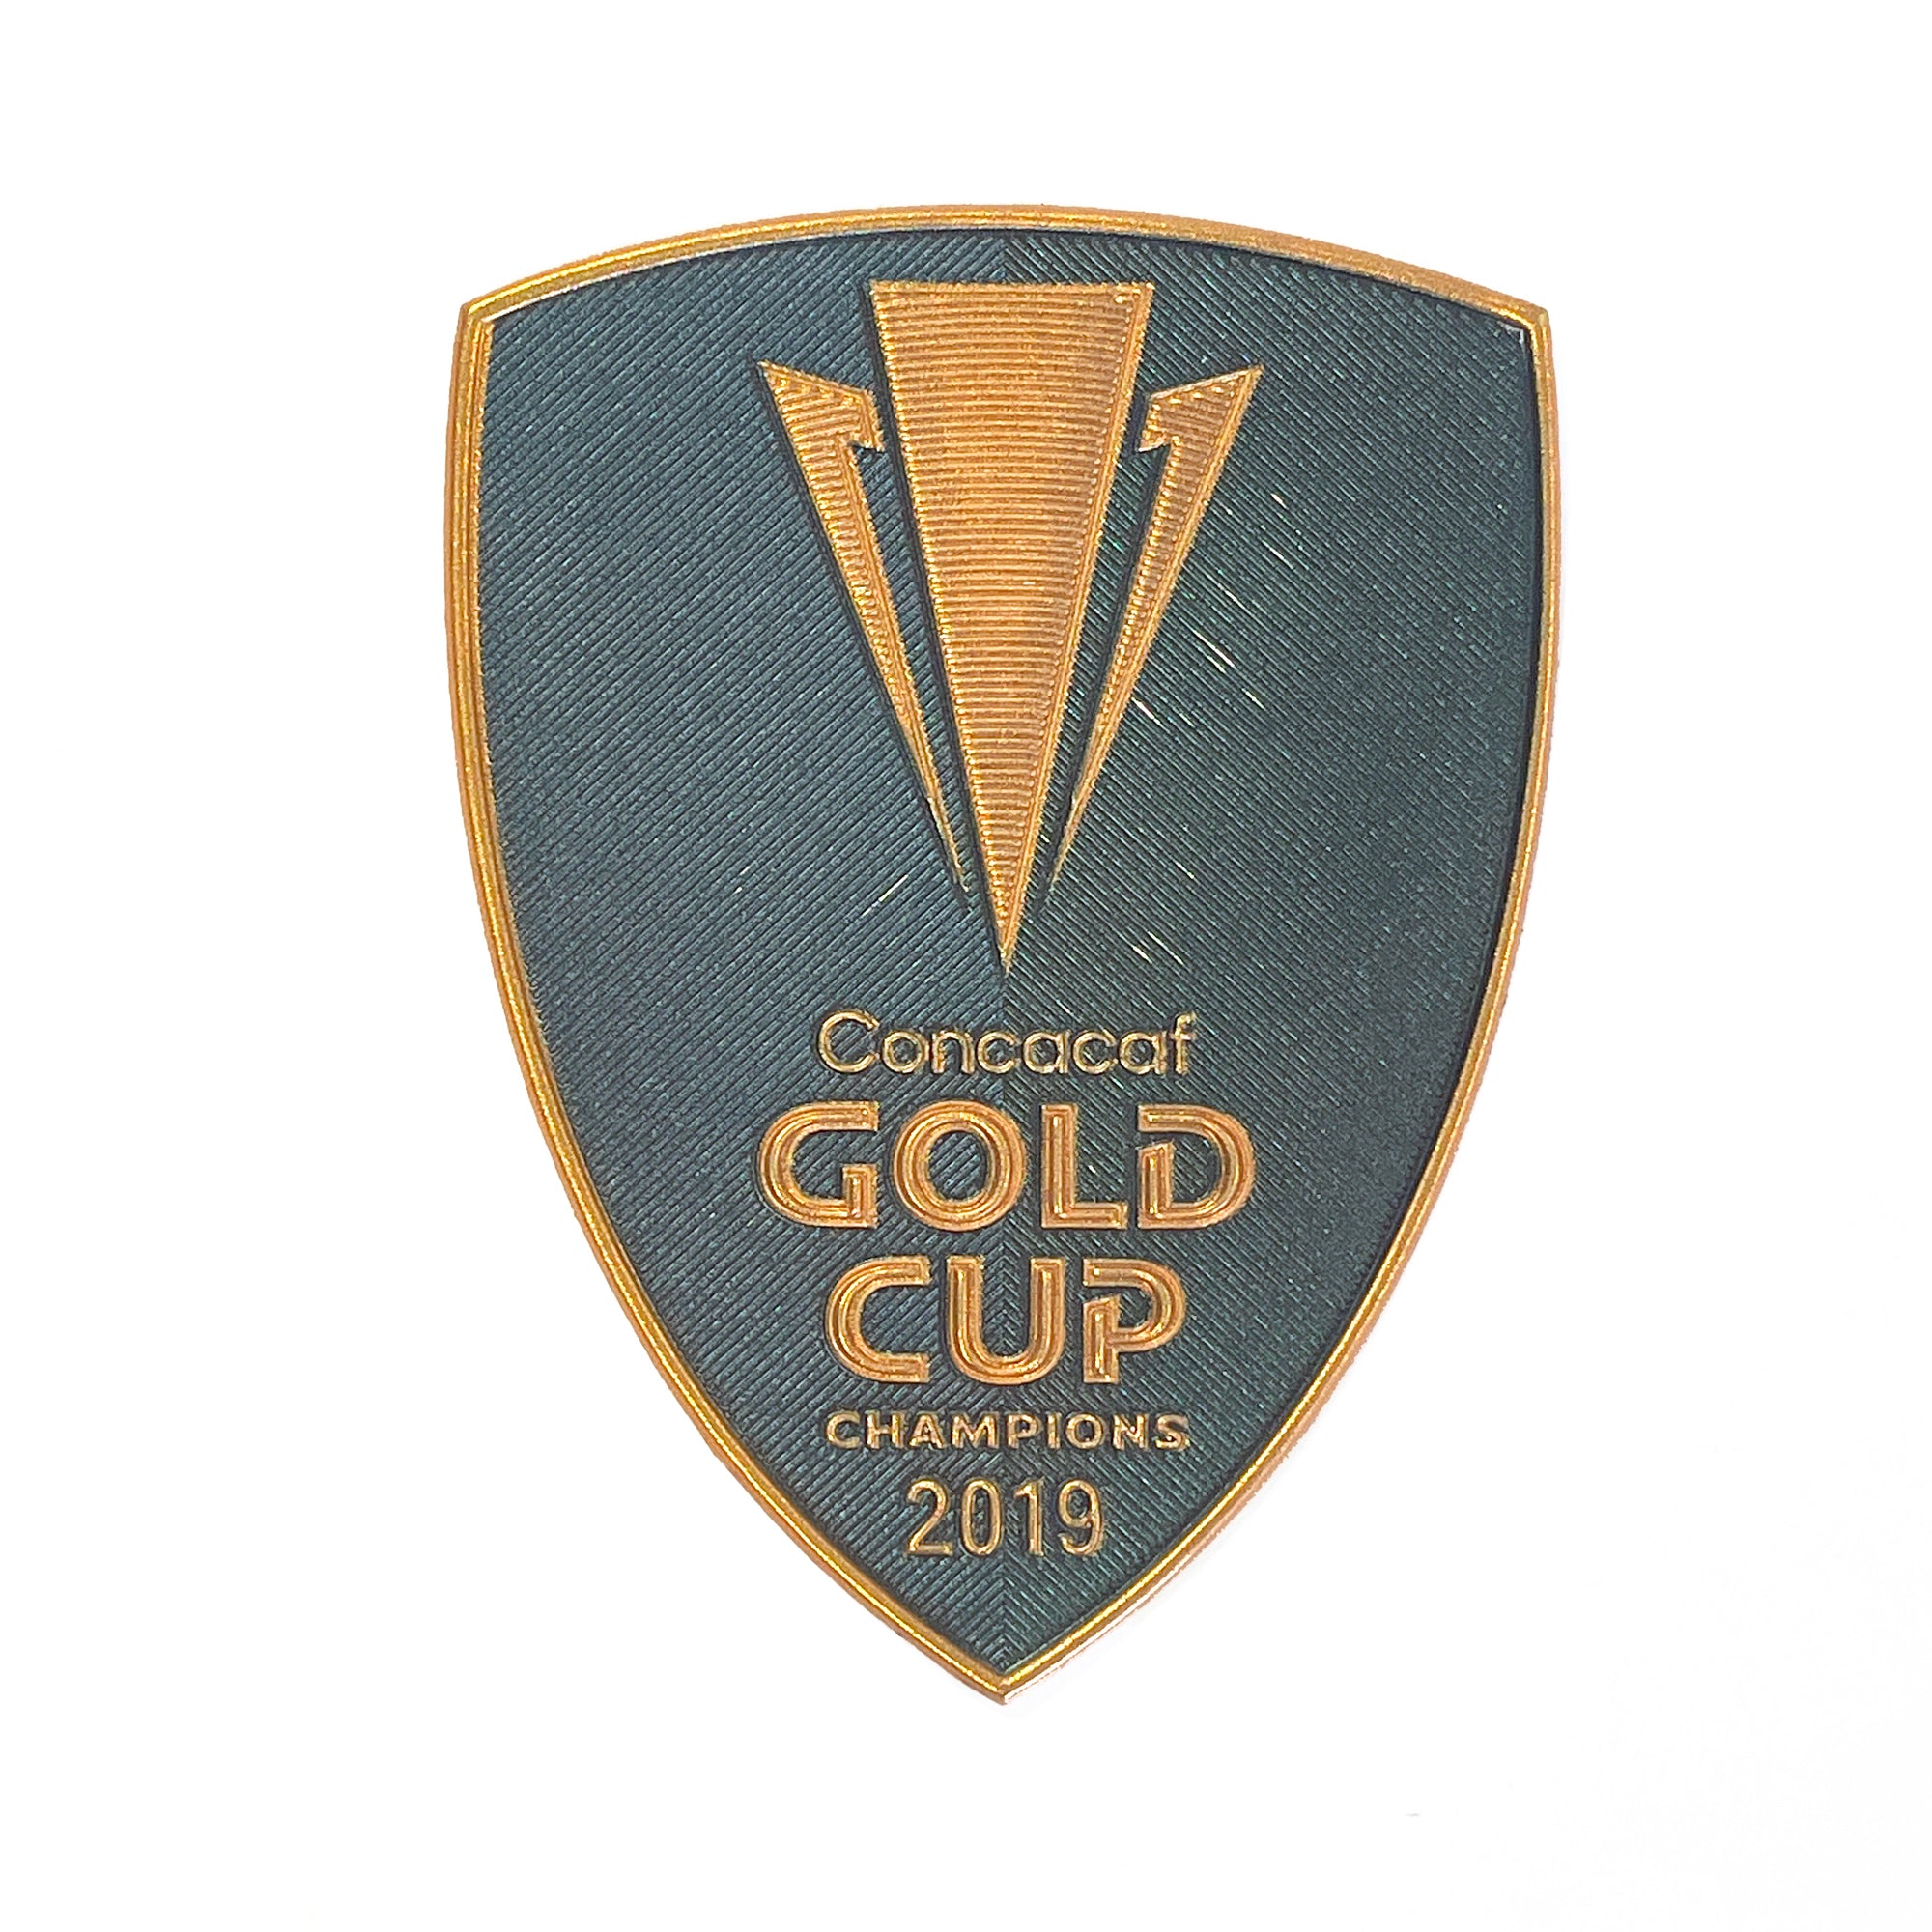 Concacaf Gold Cup Champions 2019 Badge (Mexico)